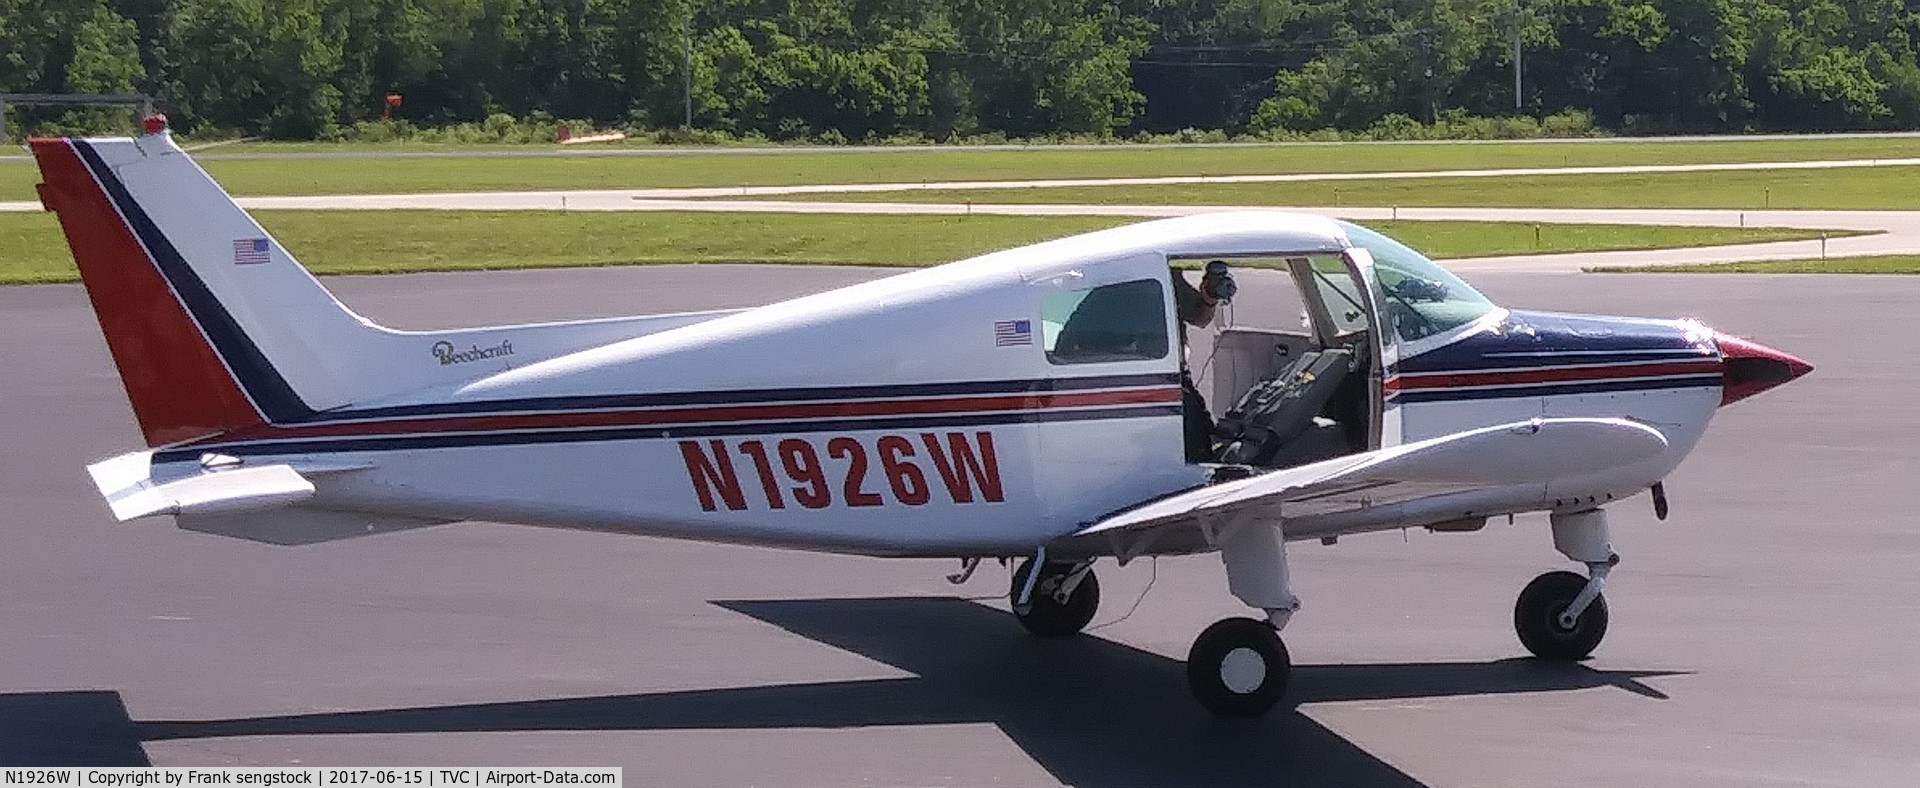 N1926W, 1973 Beech B19 Sport 150 C/N MB-587, Just after bringing it buying it and flying home